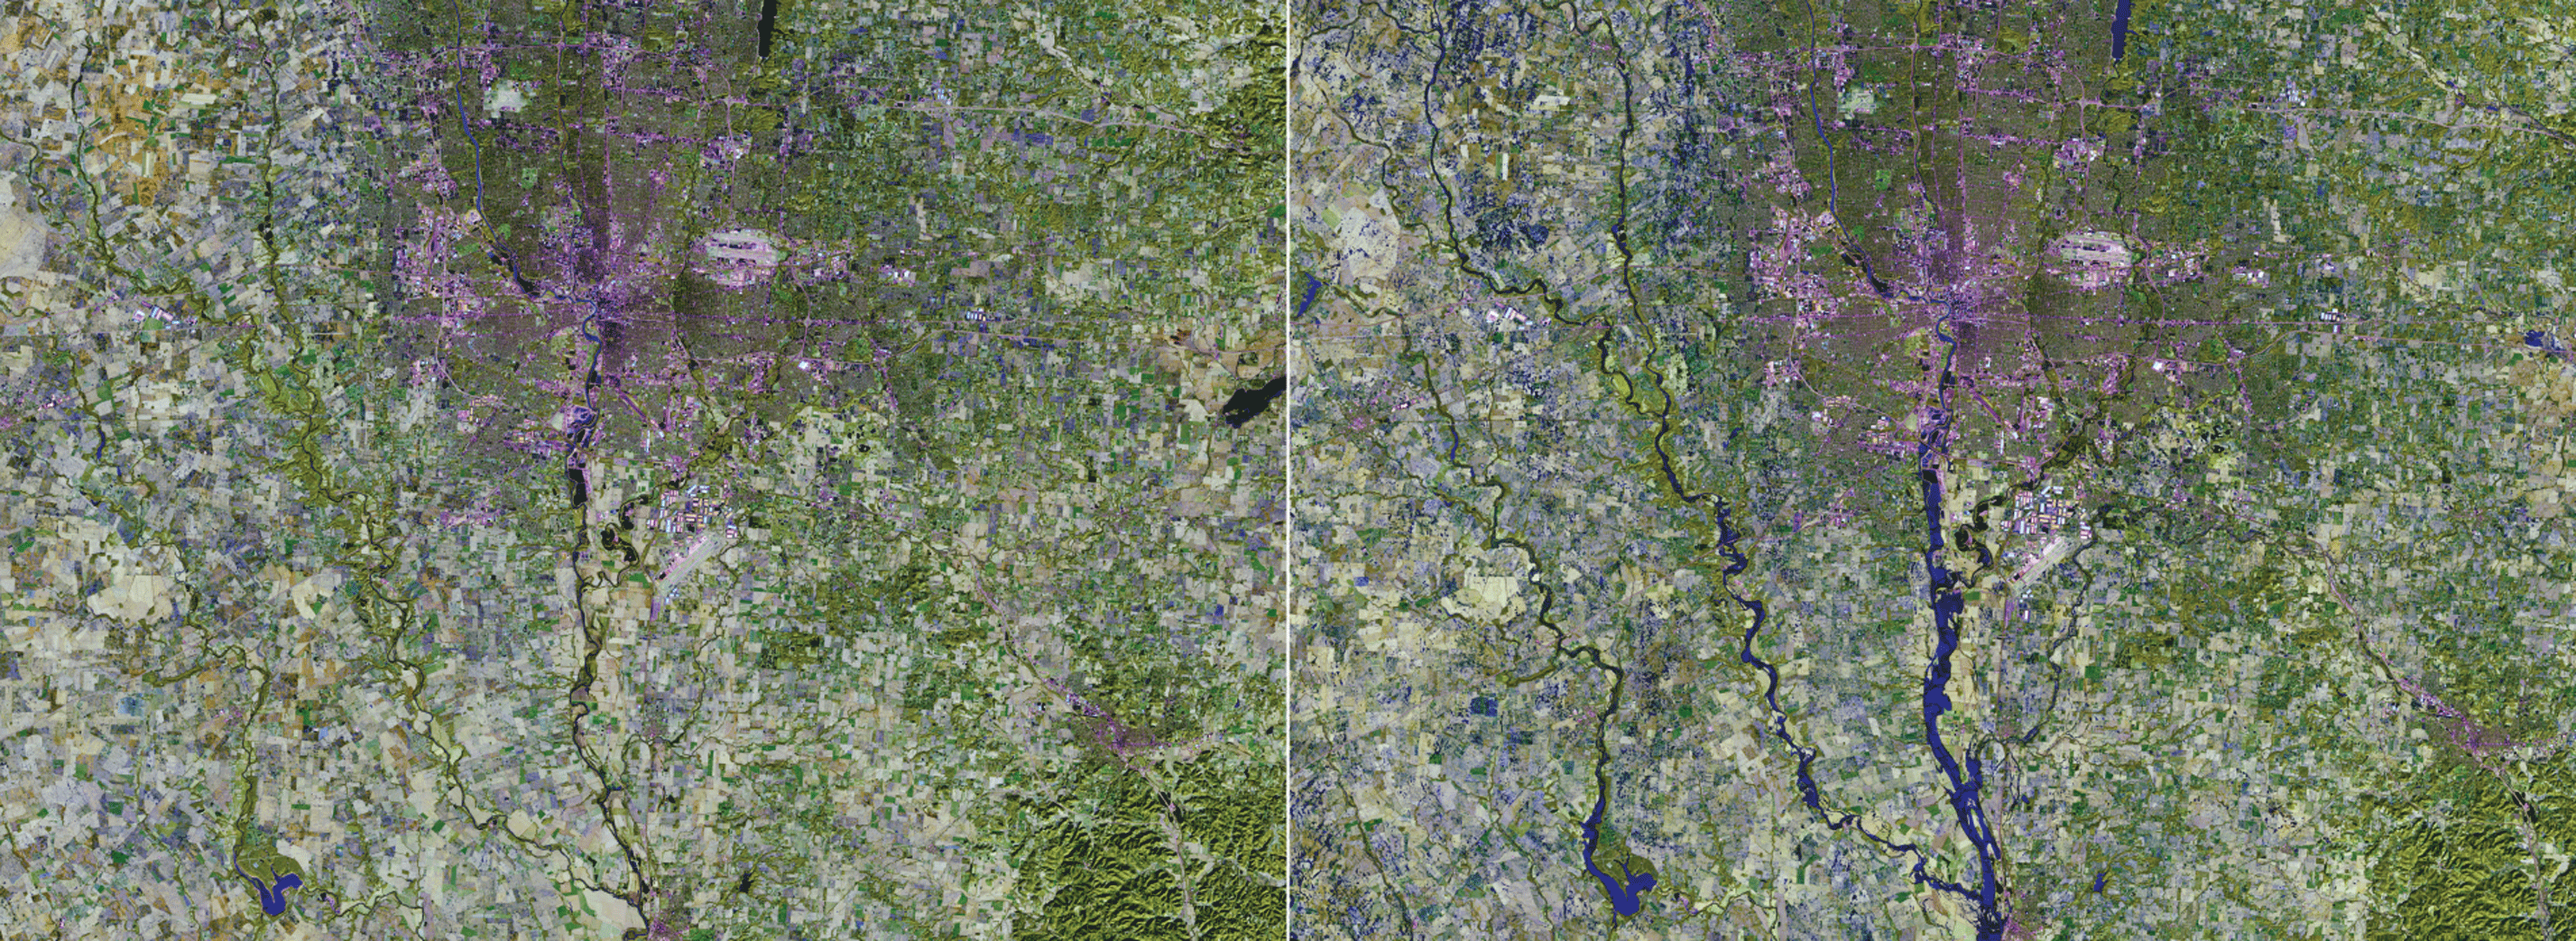 Landsat images show the flooded Scioto River in 2018 compared to normal water levels
                     in 2016.